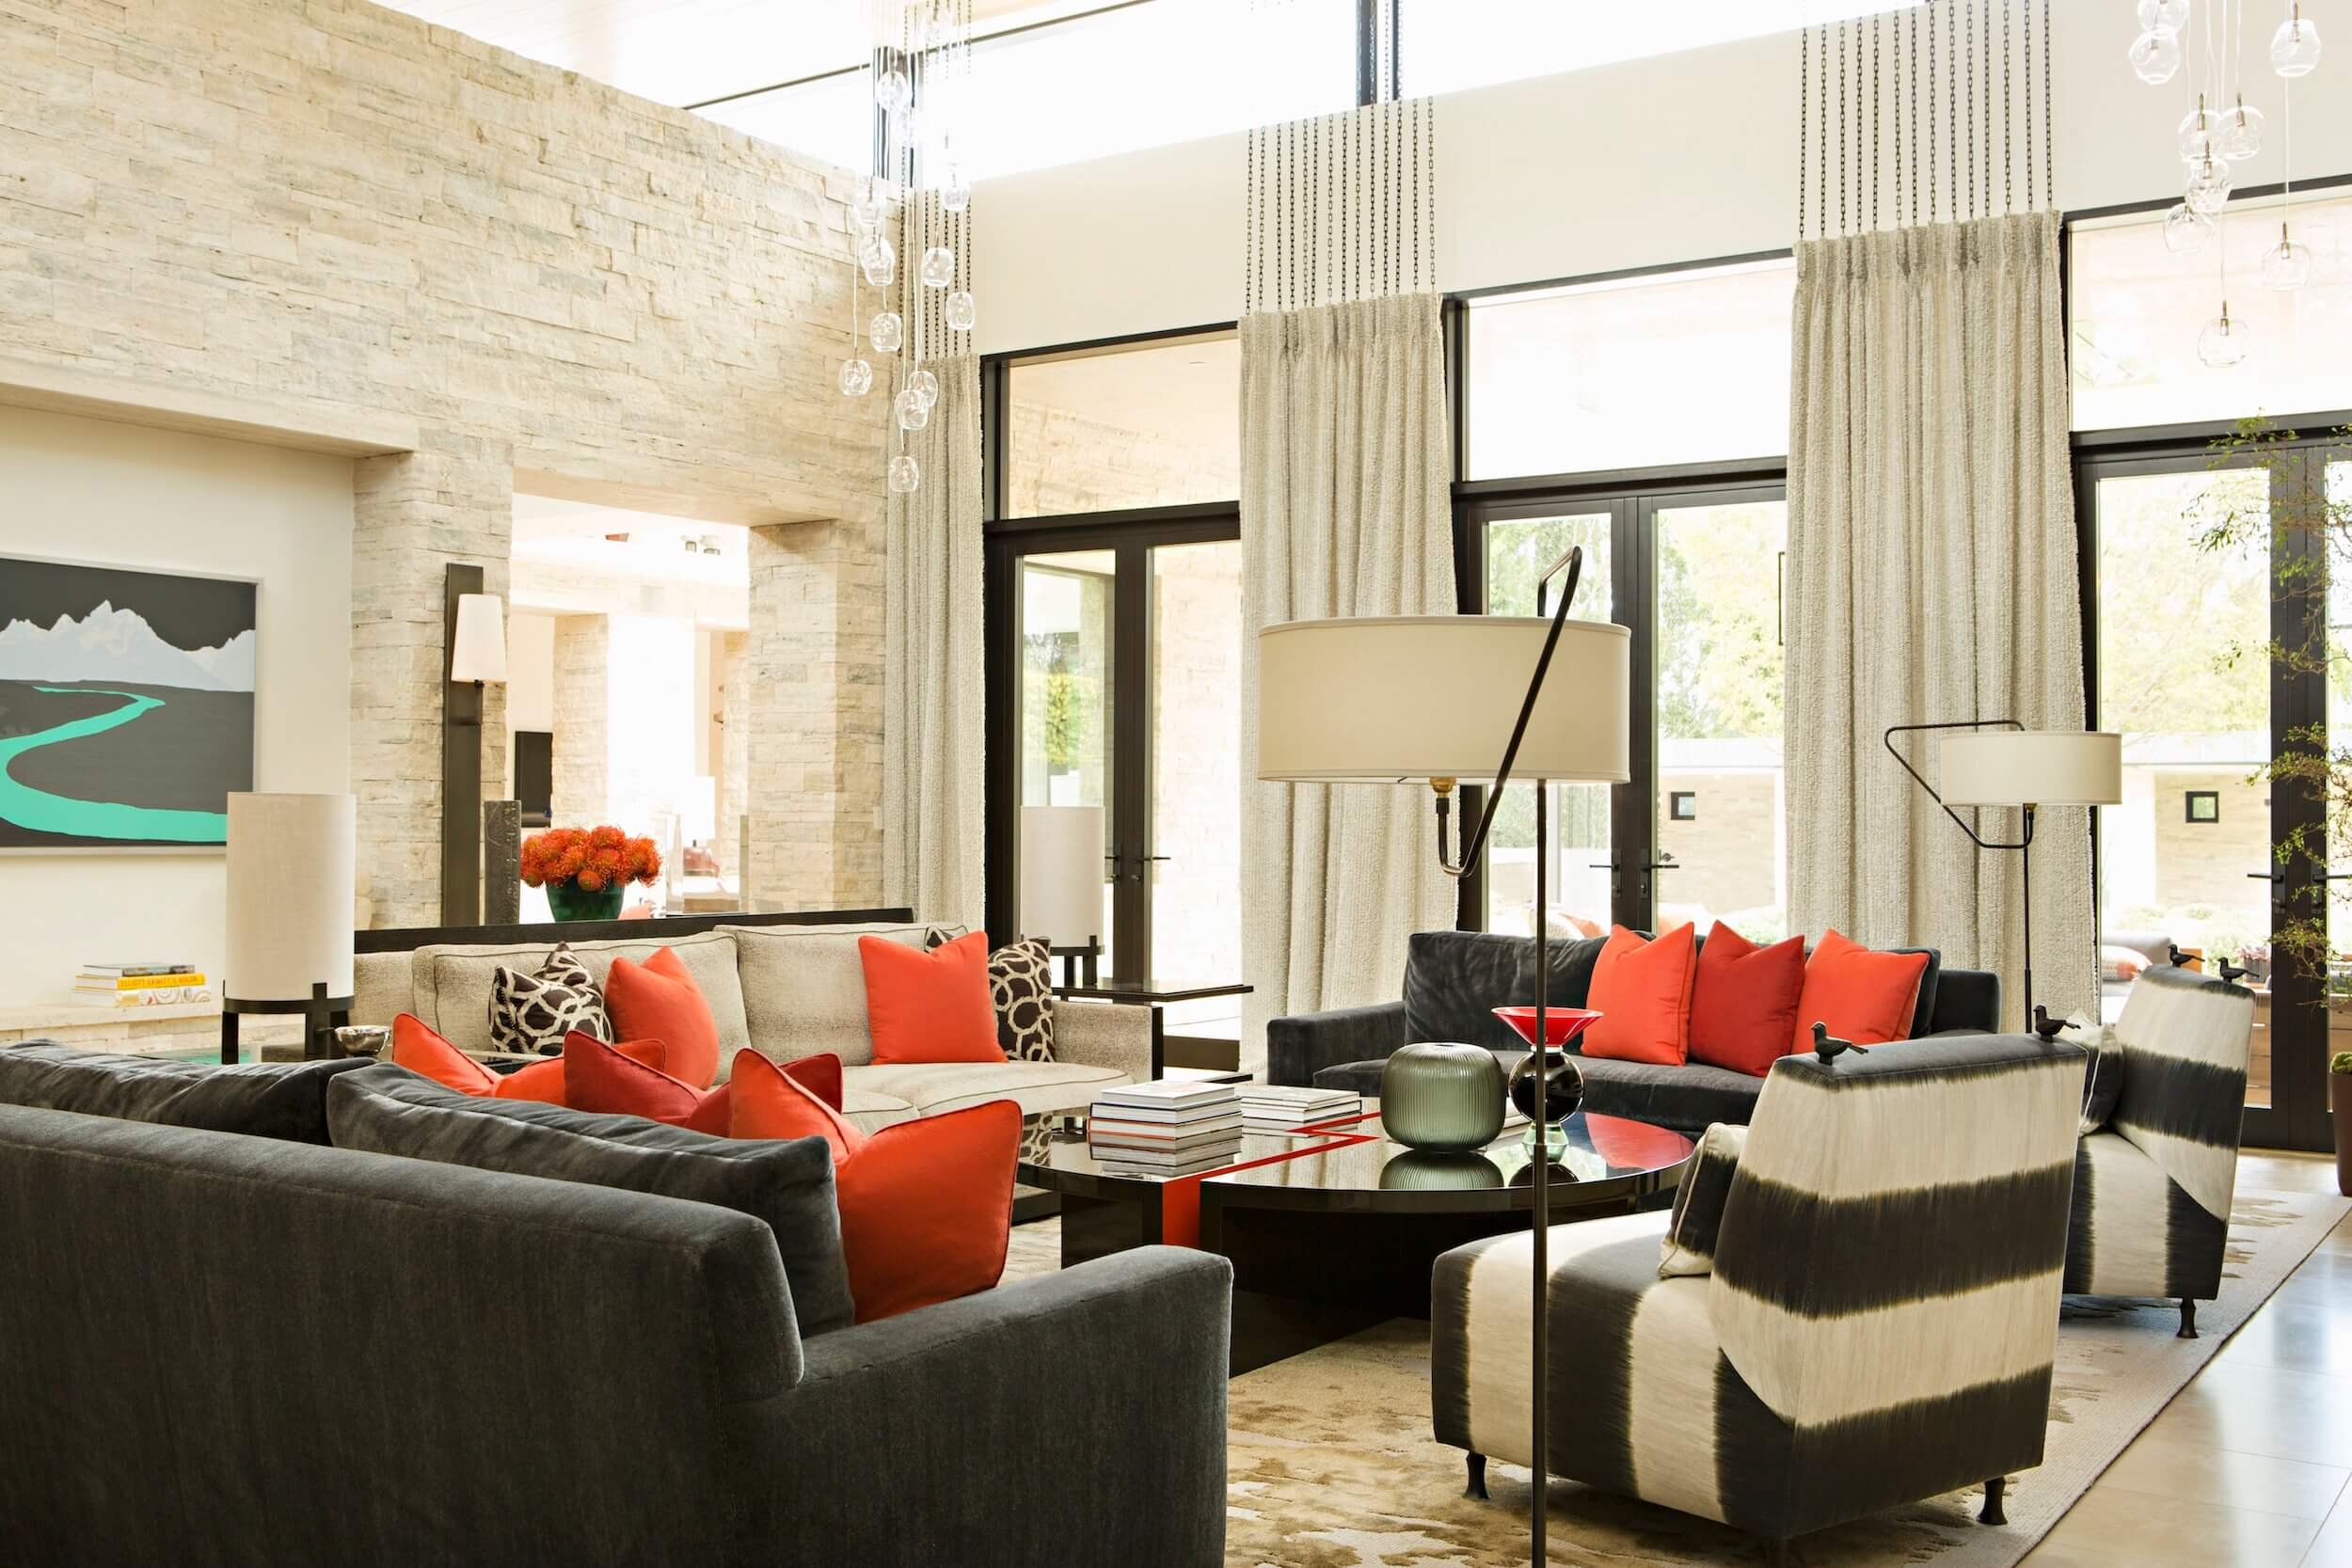 A Great Room with furnishing in a monochromatic palette accented by reds and a lacquered coffee table customized Dana John